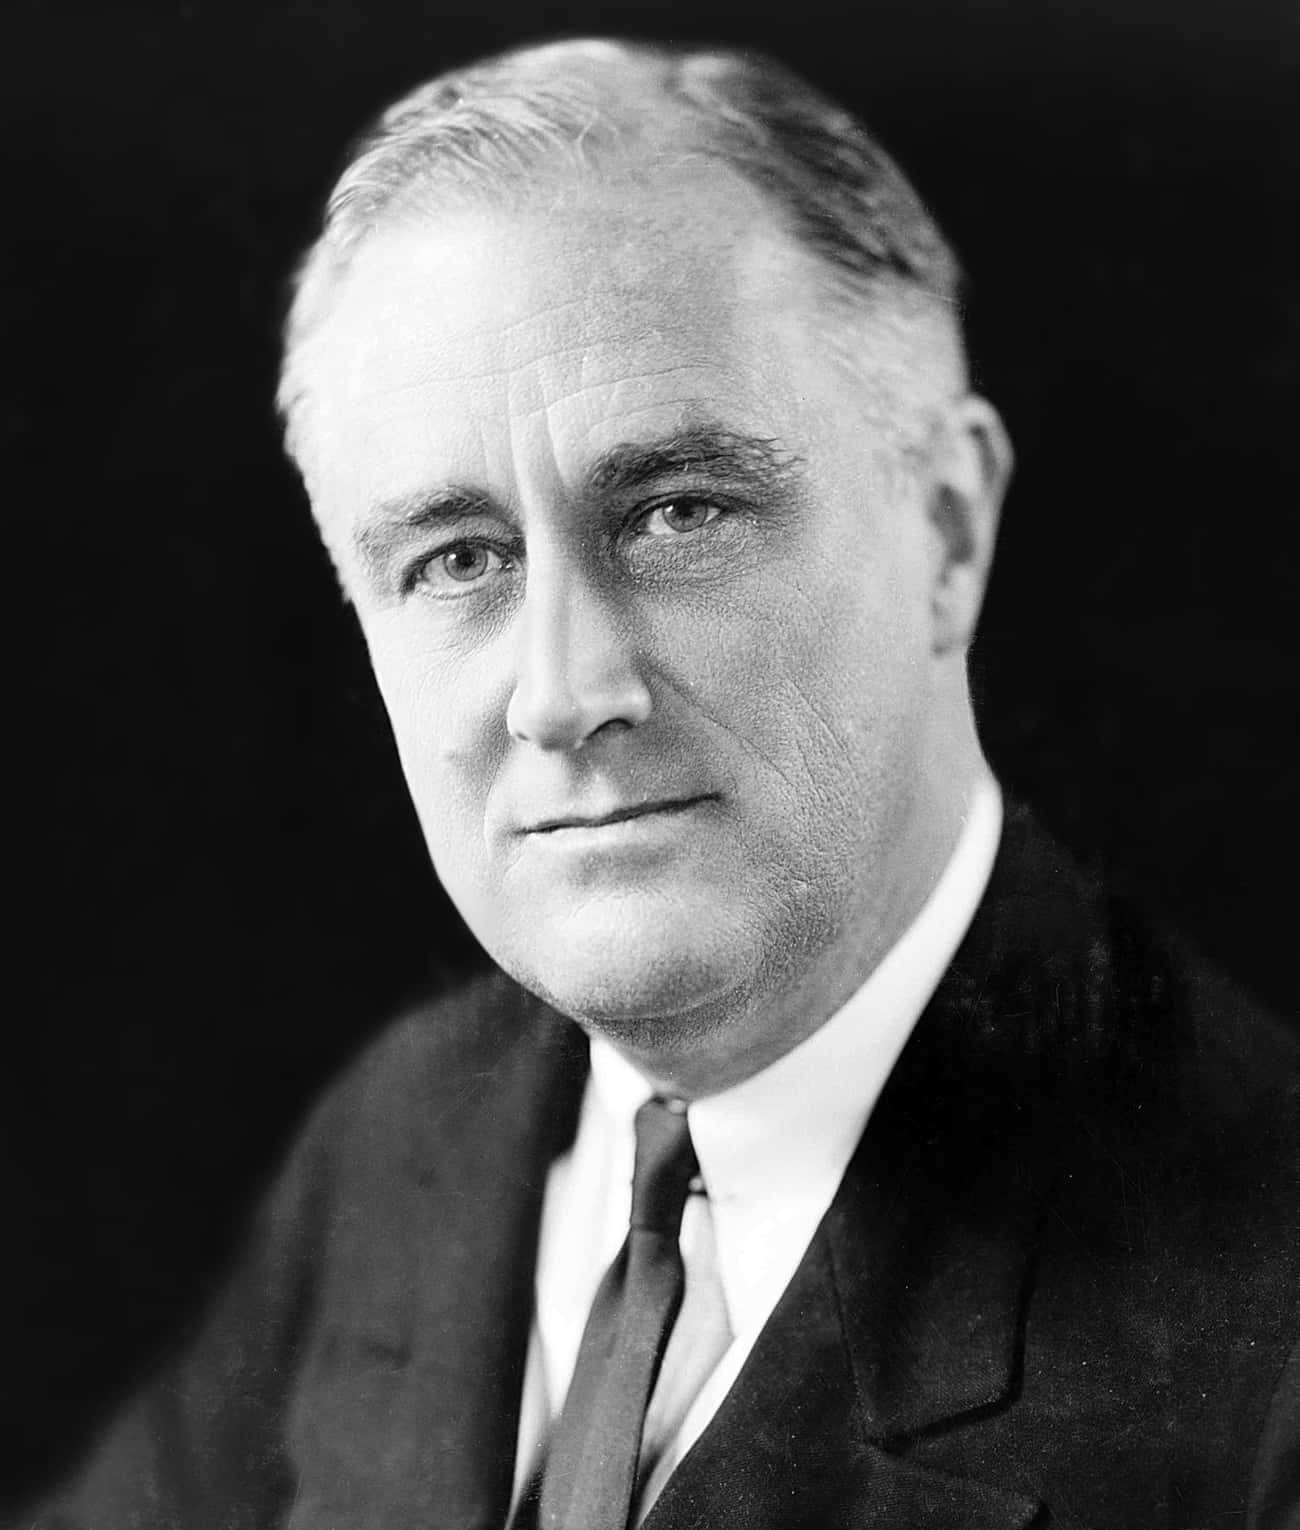 Franklin D. Roosevelt Ran The United States With Polio